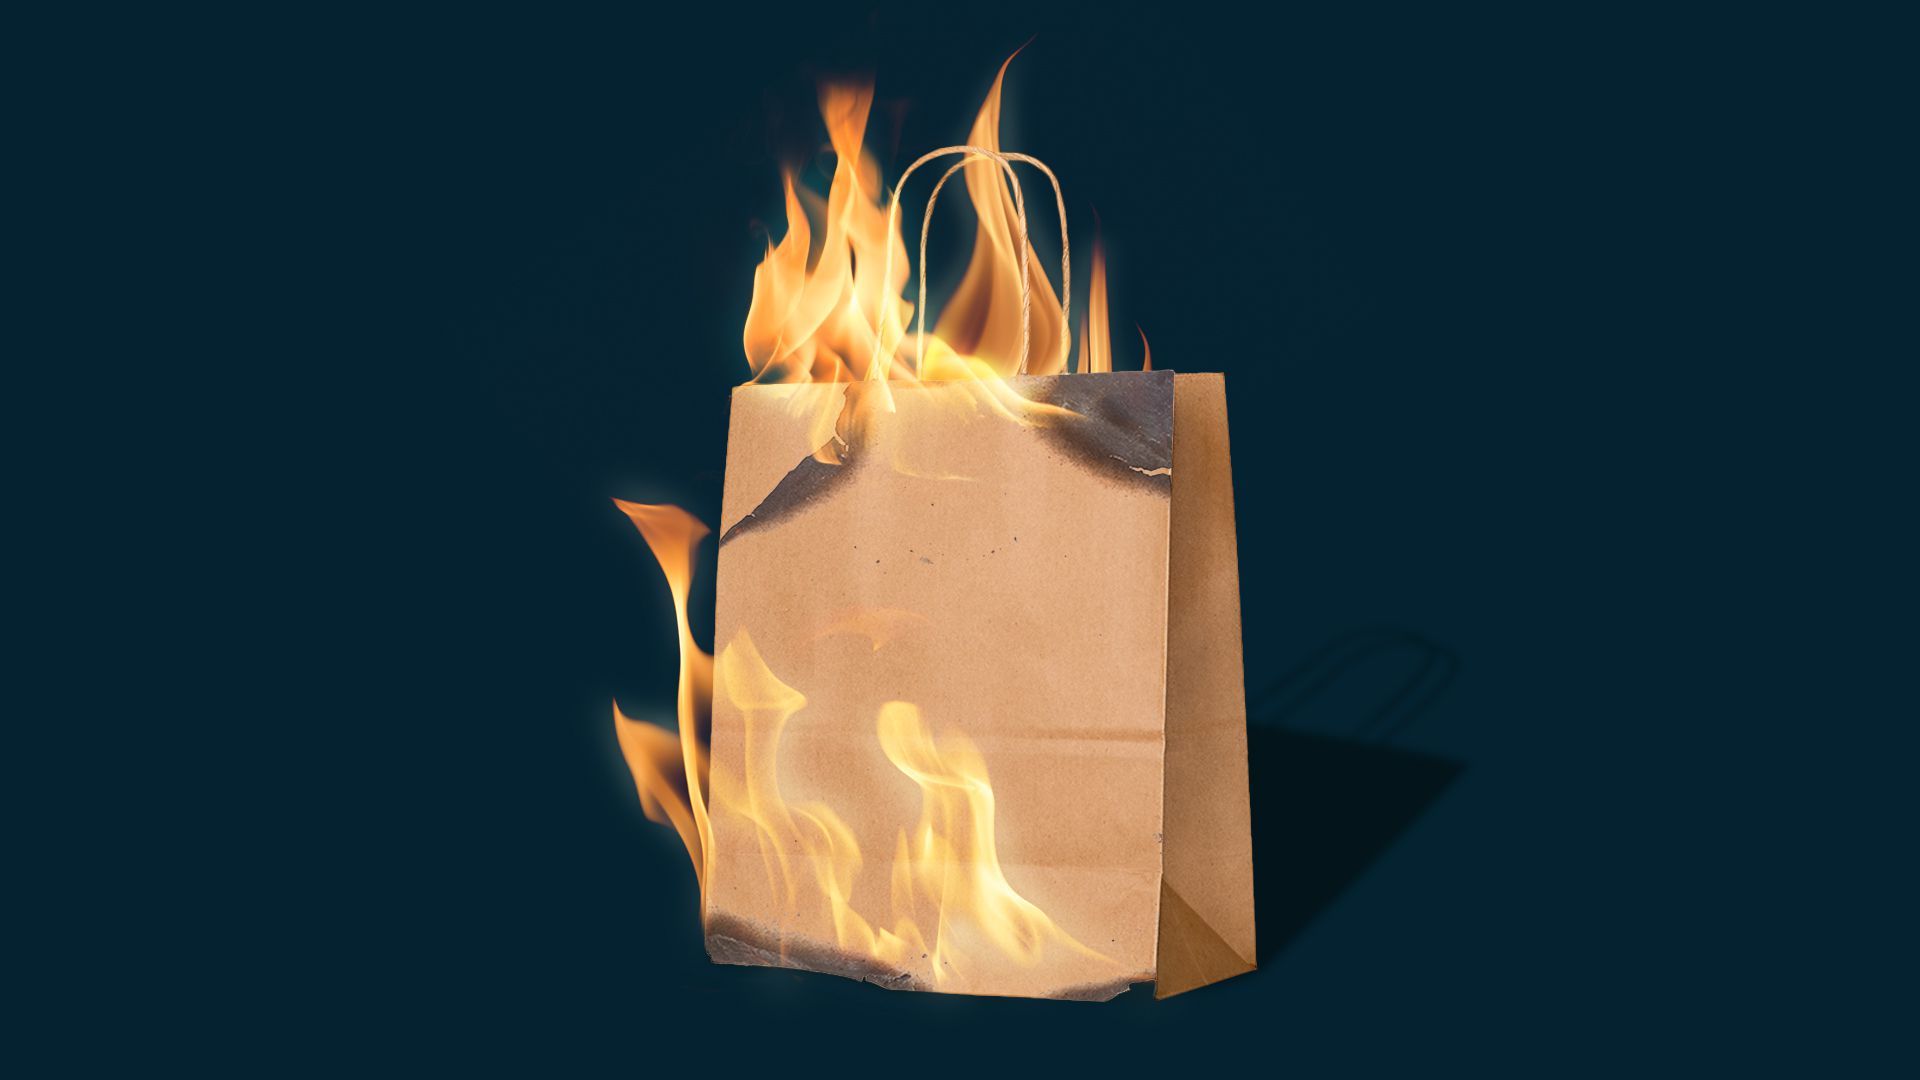 Illustration of a paper shopping bag that is on fire